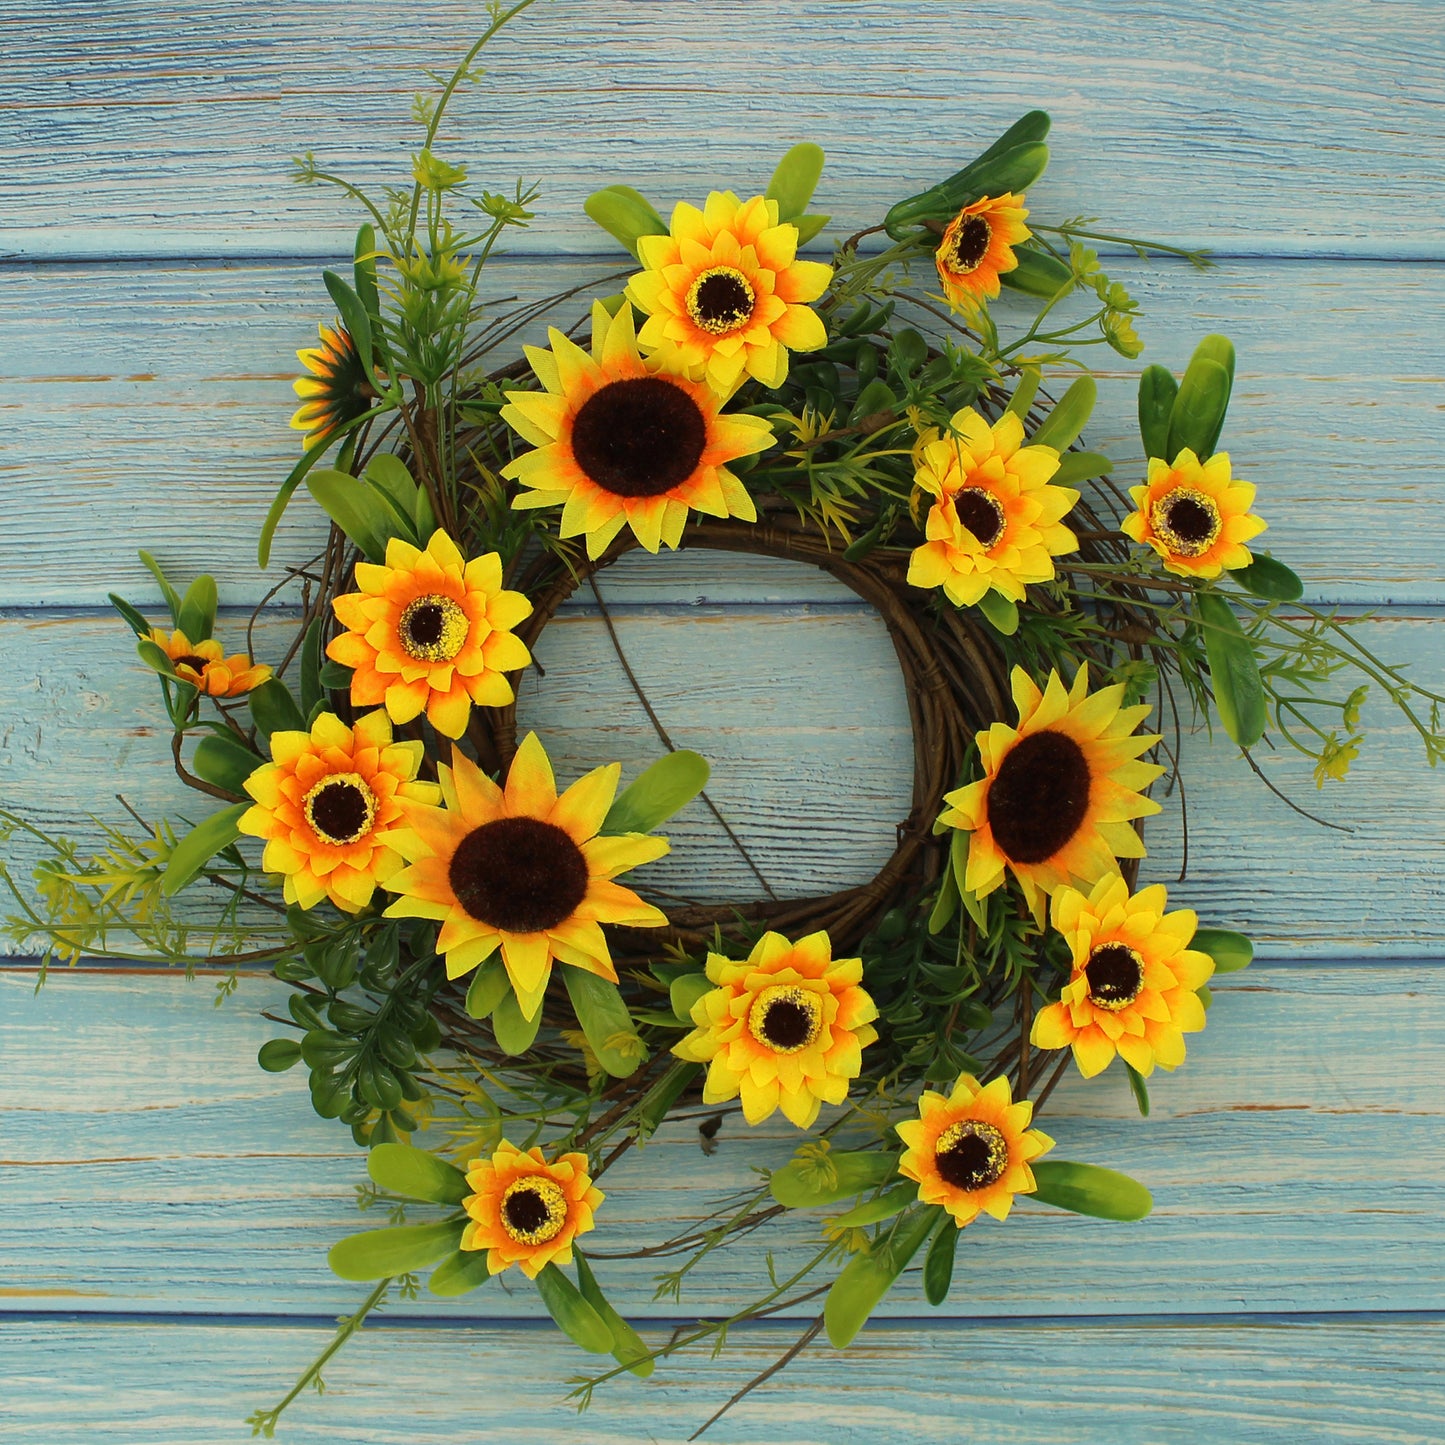 CVHOMEDECO. Rustic Country Artificial Sunflower and Twig Wreath, Year Round Full Green Wreath for Indoor or Outdoor Display, 14 Inch